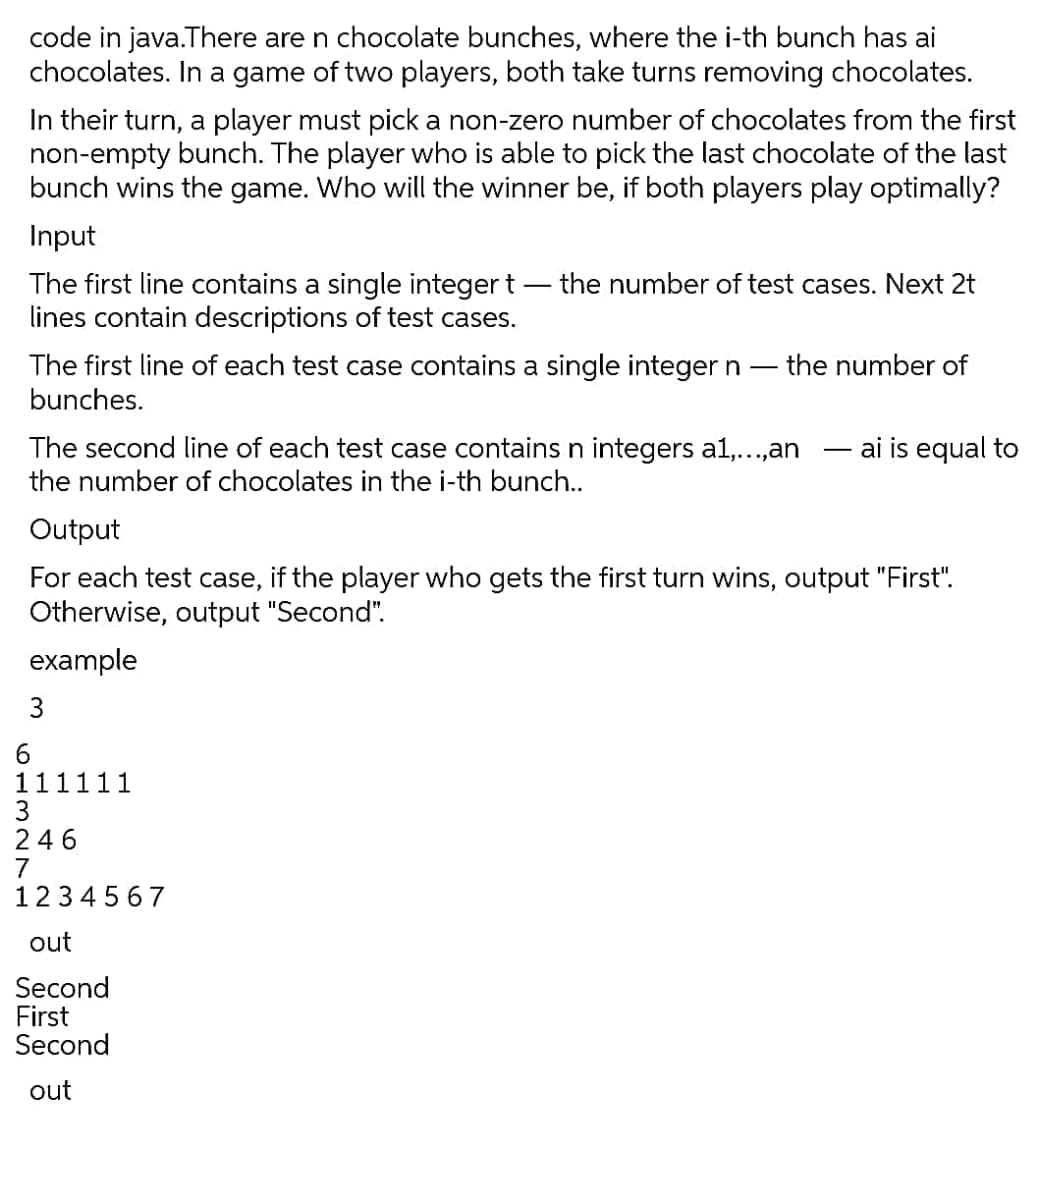 code in java.There are n chocolate bunches, where the i-th bunch has ai
chocolates. In a game of two players, both take turns removing chocolates.
In their turn, a player must pick a non-zero number of chocolates from the first
non-empty bunch. The player who is able to pick the last chocolate of the last
bunch wins the game. Who will the winner be, if both players play optimally?
Input
The first line contains a single integer t – the number of test cases. Next 2t
lines contain descriptions of test cases.
The first line of each test case contains a single integer n
- the number of
bunches.
The second line of each test case contains n integers al1,...,an
the number of chocolates in the i-th bunch..
ai is equal to
Output
For each test case,
if the player who gets the first turn wins, output "First".
Otherwise, output "Second".
example
6.
111111
3
246
7
1234 567
out
Second
First
Second
out
